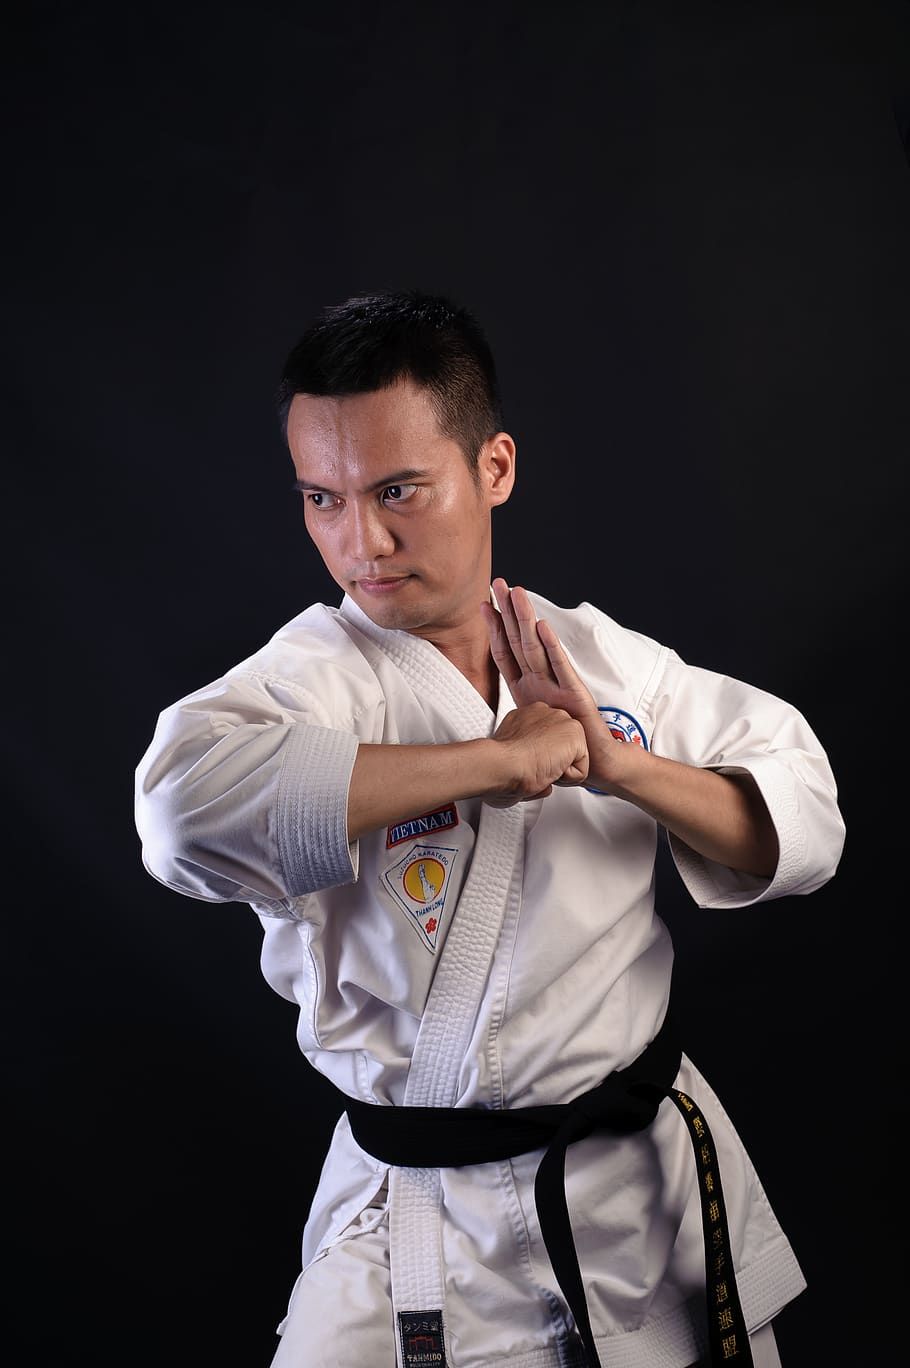 man in karate gi outfit, studio shot, black background, one person